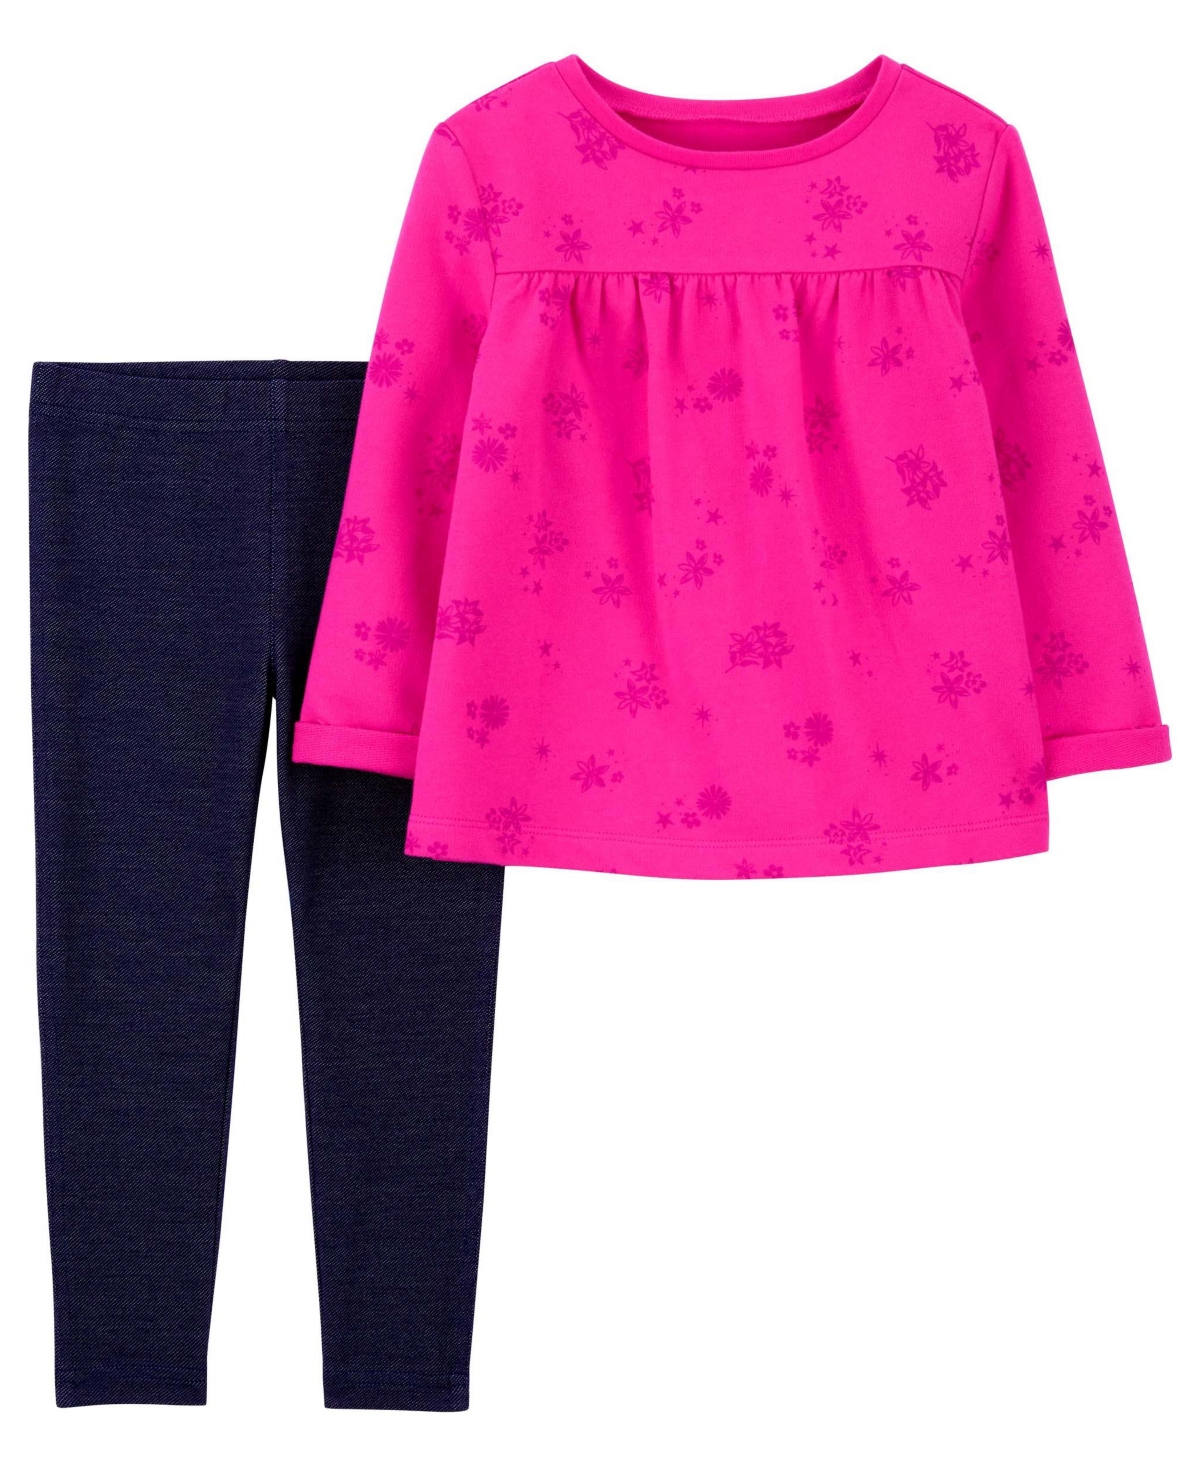 Carter's Toddler Girls Babydoll Top And Pants, 2 Piece Set In Pink